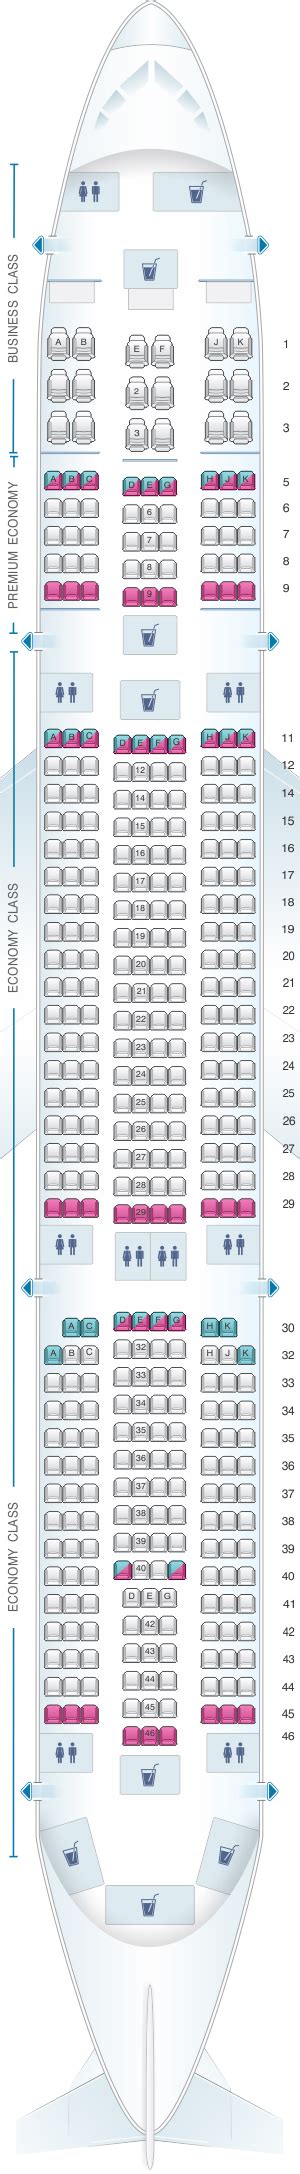 Air France Airbus A350 900 Seating Image To U